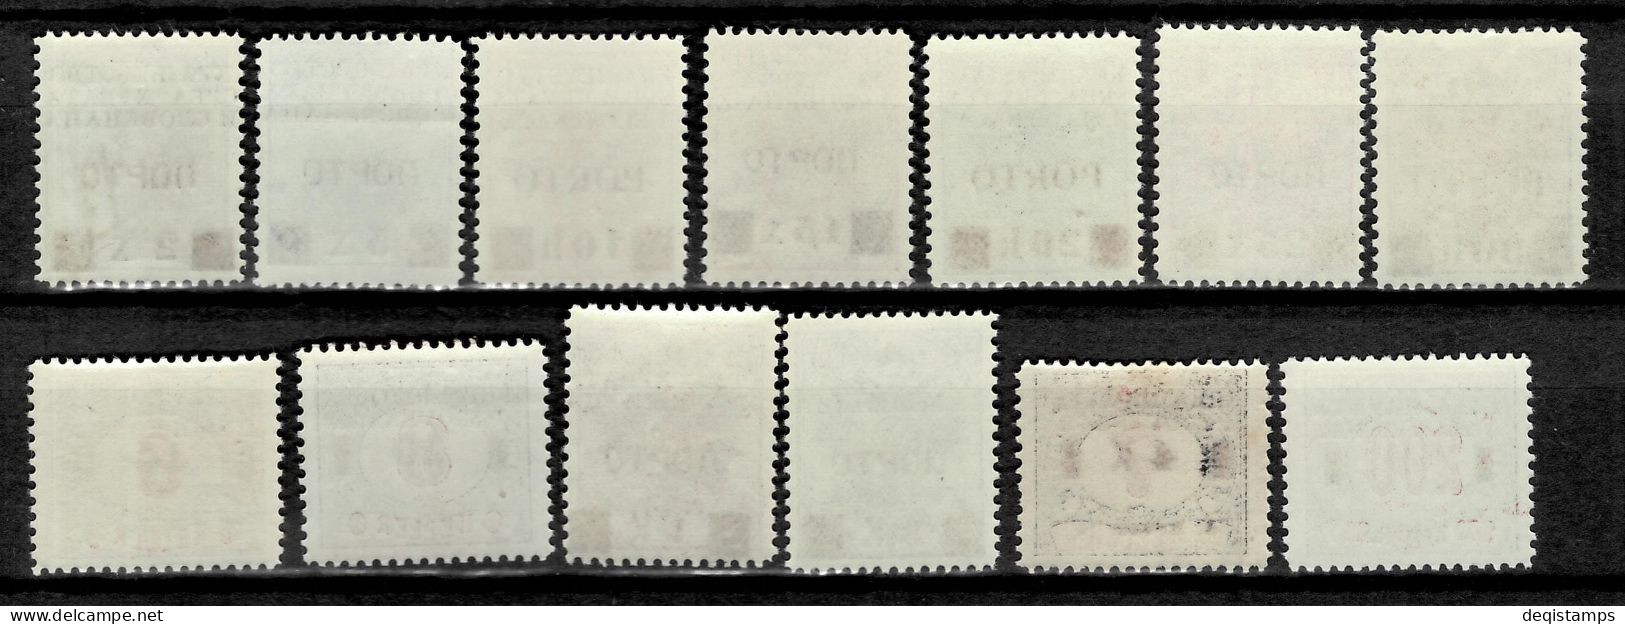 SHS - Bosnia 1919 Complete Porto Set Michel 14-26 Mint Never Hinged (**) - Unused Stamps